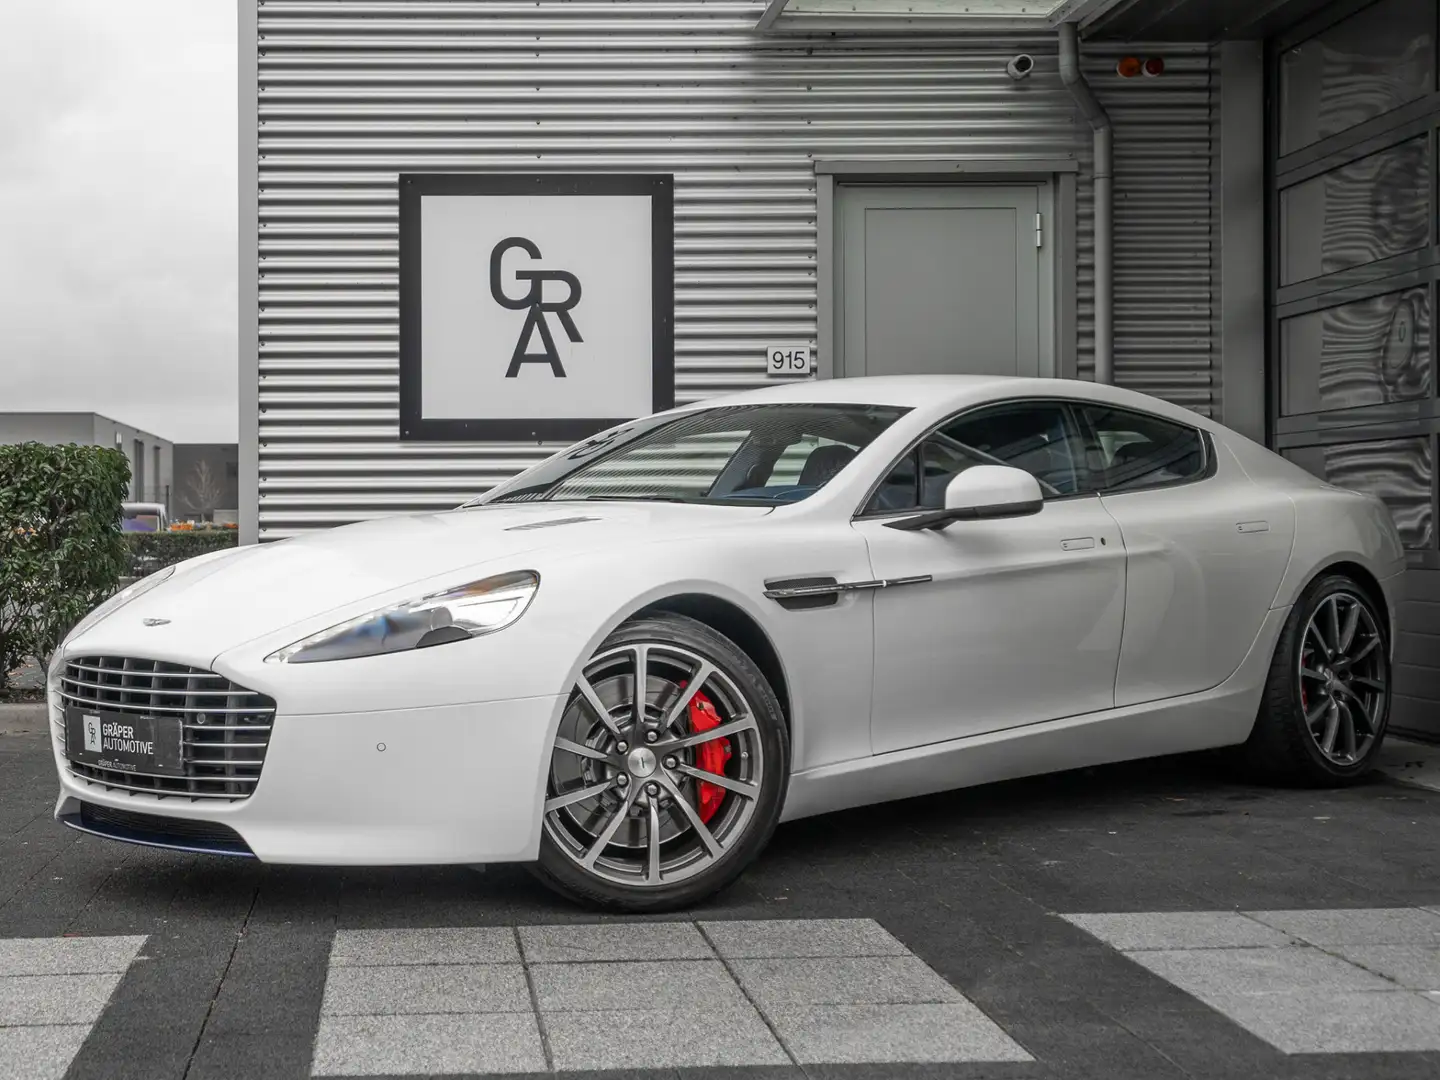 Aston Martin Rapide S 6.0 V12 ‘Britain is Great’ Edition by Q 1/8 Alb - 2